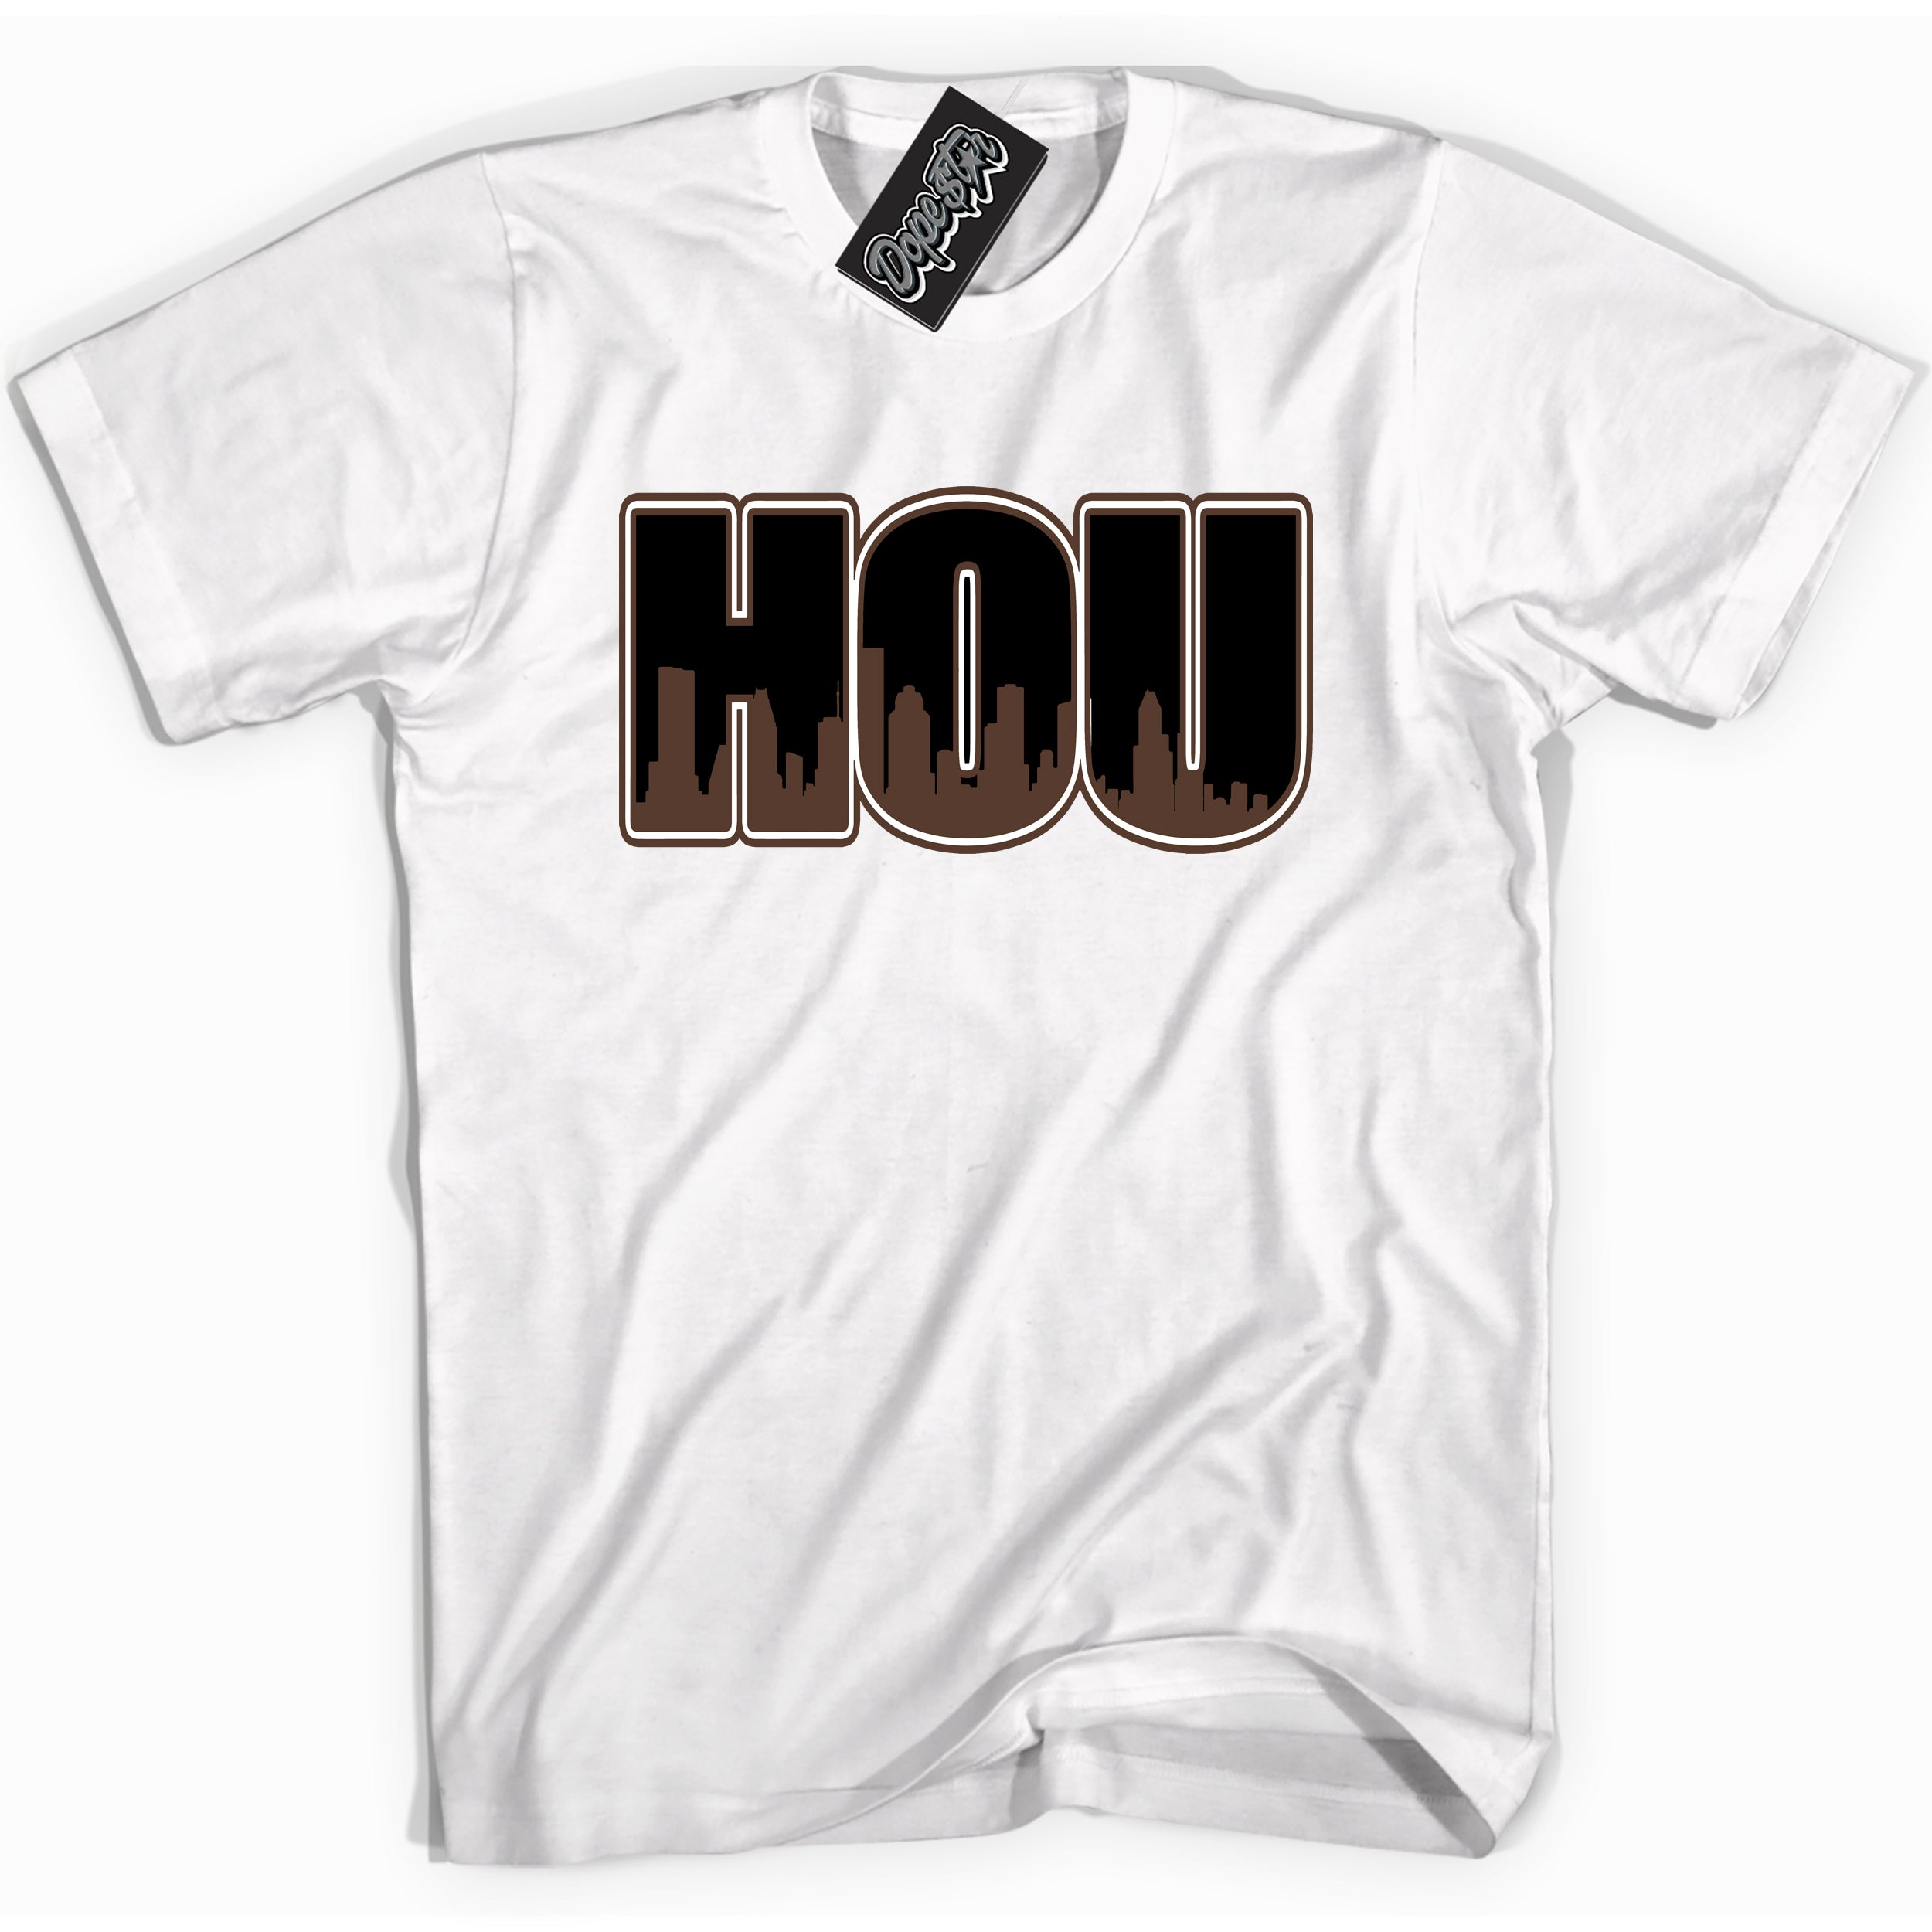 Cool White graphic tee with “ Houston ” design, that perfectly matches Palomino 1s sneakers 